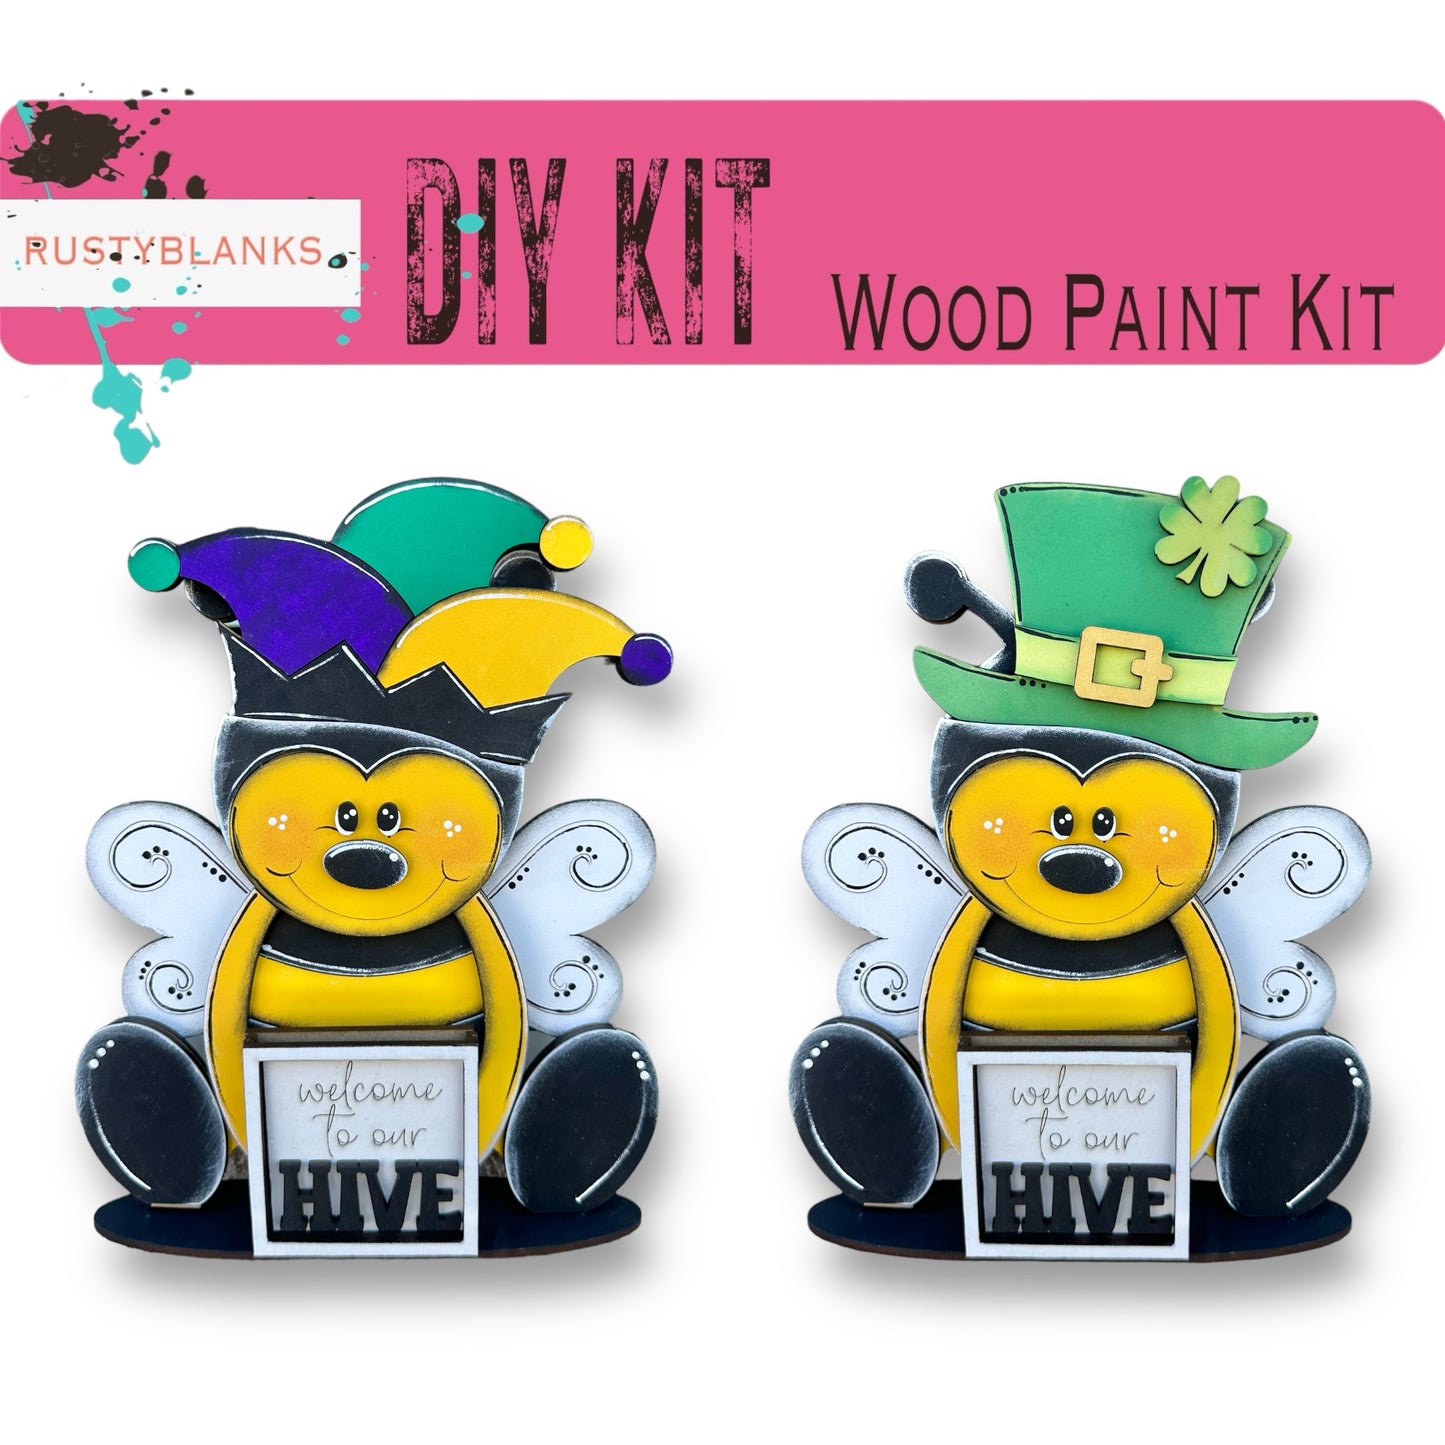 a pair of wooden paint kits with a bear wearing a top hat